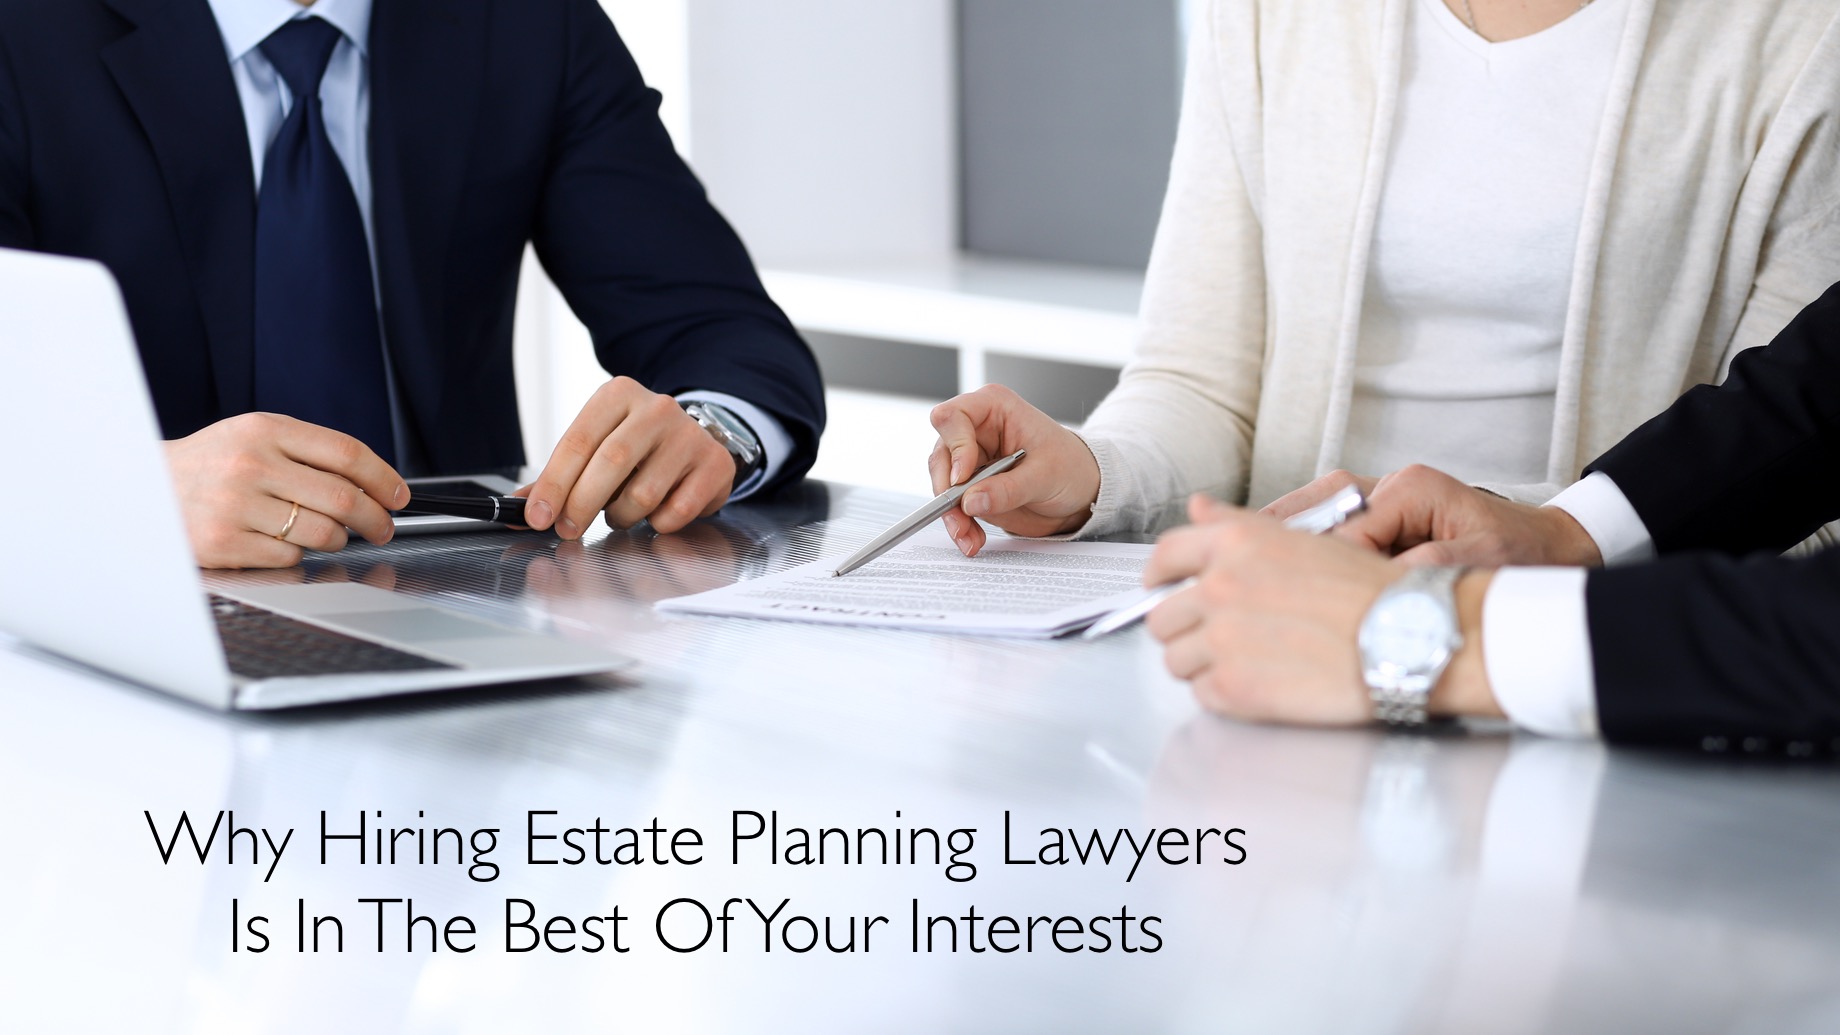 Why Hiring Estate Planning Lawyers Is In The Best Of Your Interests